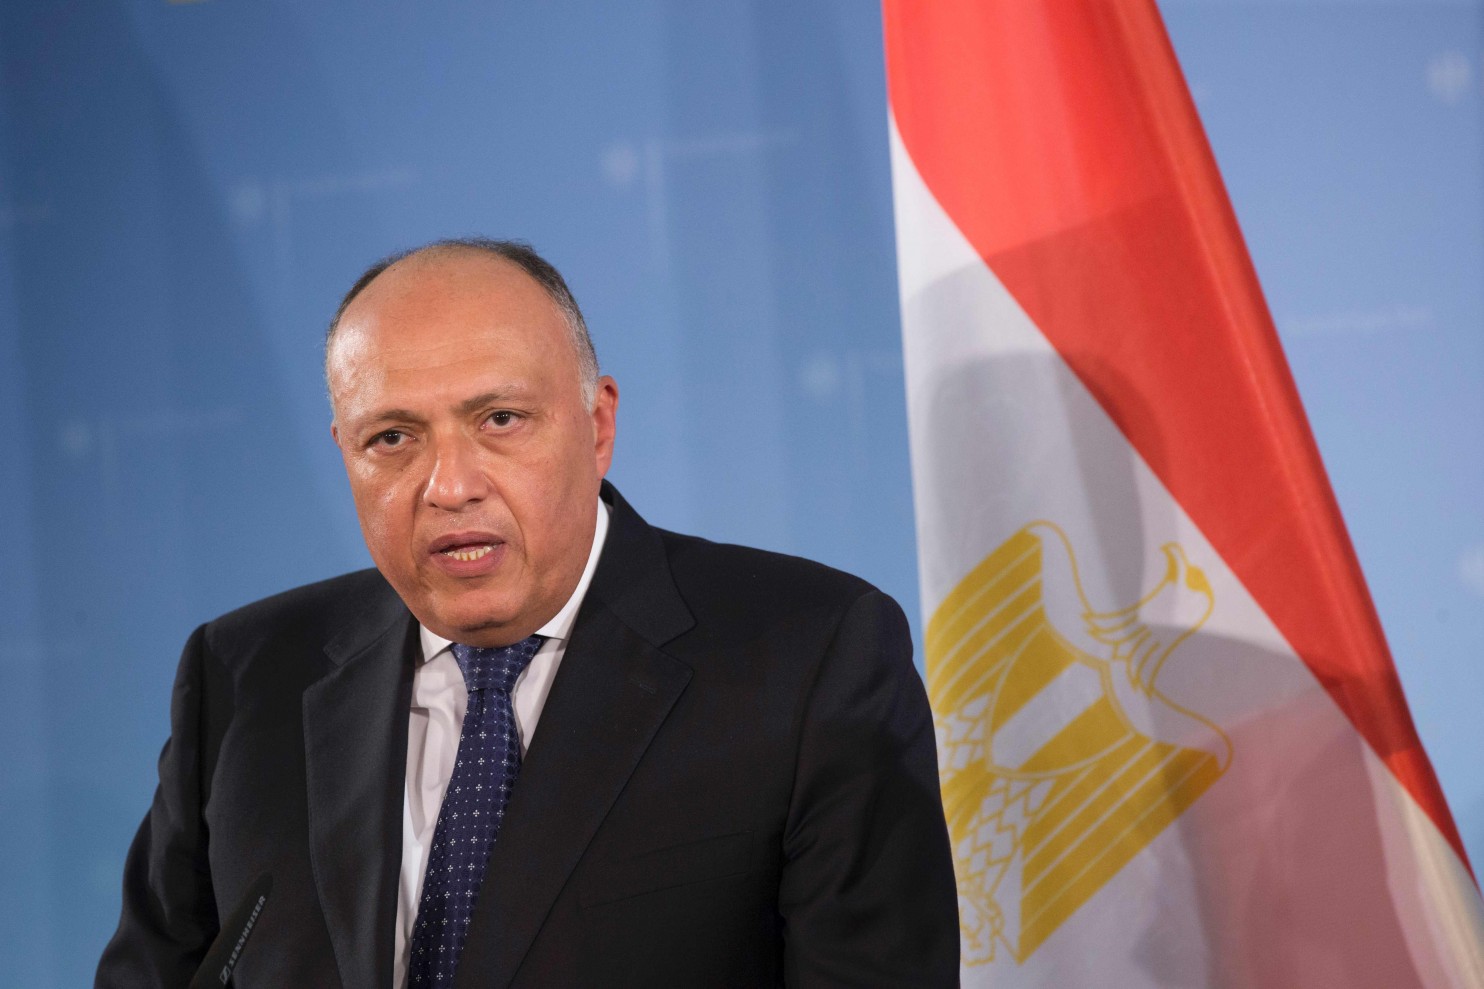 Sameh Shoukry at a press conference in Berlin in January 2016 (Axel Schmidt/AFP/Getty Images)